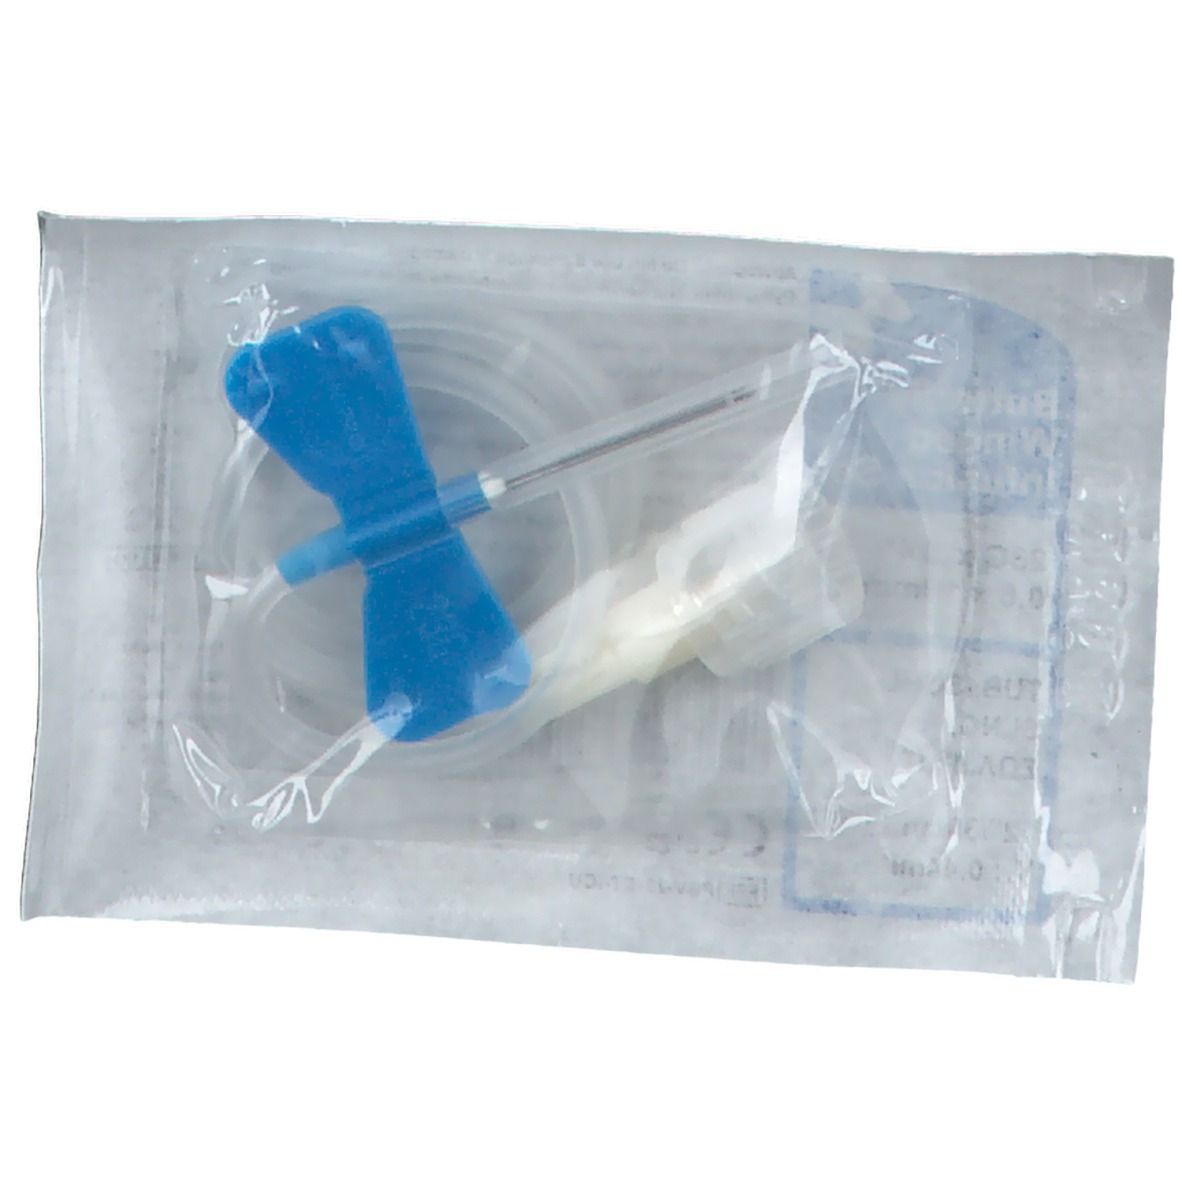 Image of Butterfly™ Steriles Flügel-Infusionsset 23 G 0,6 x 19 mm